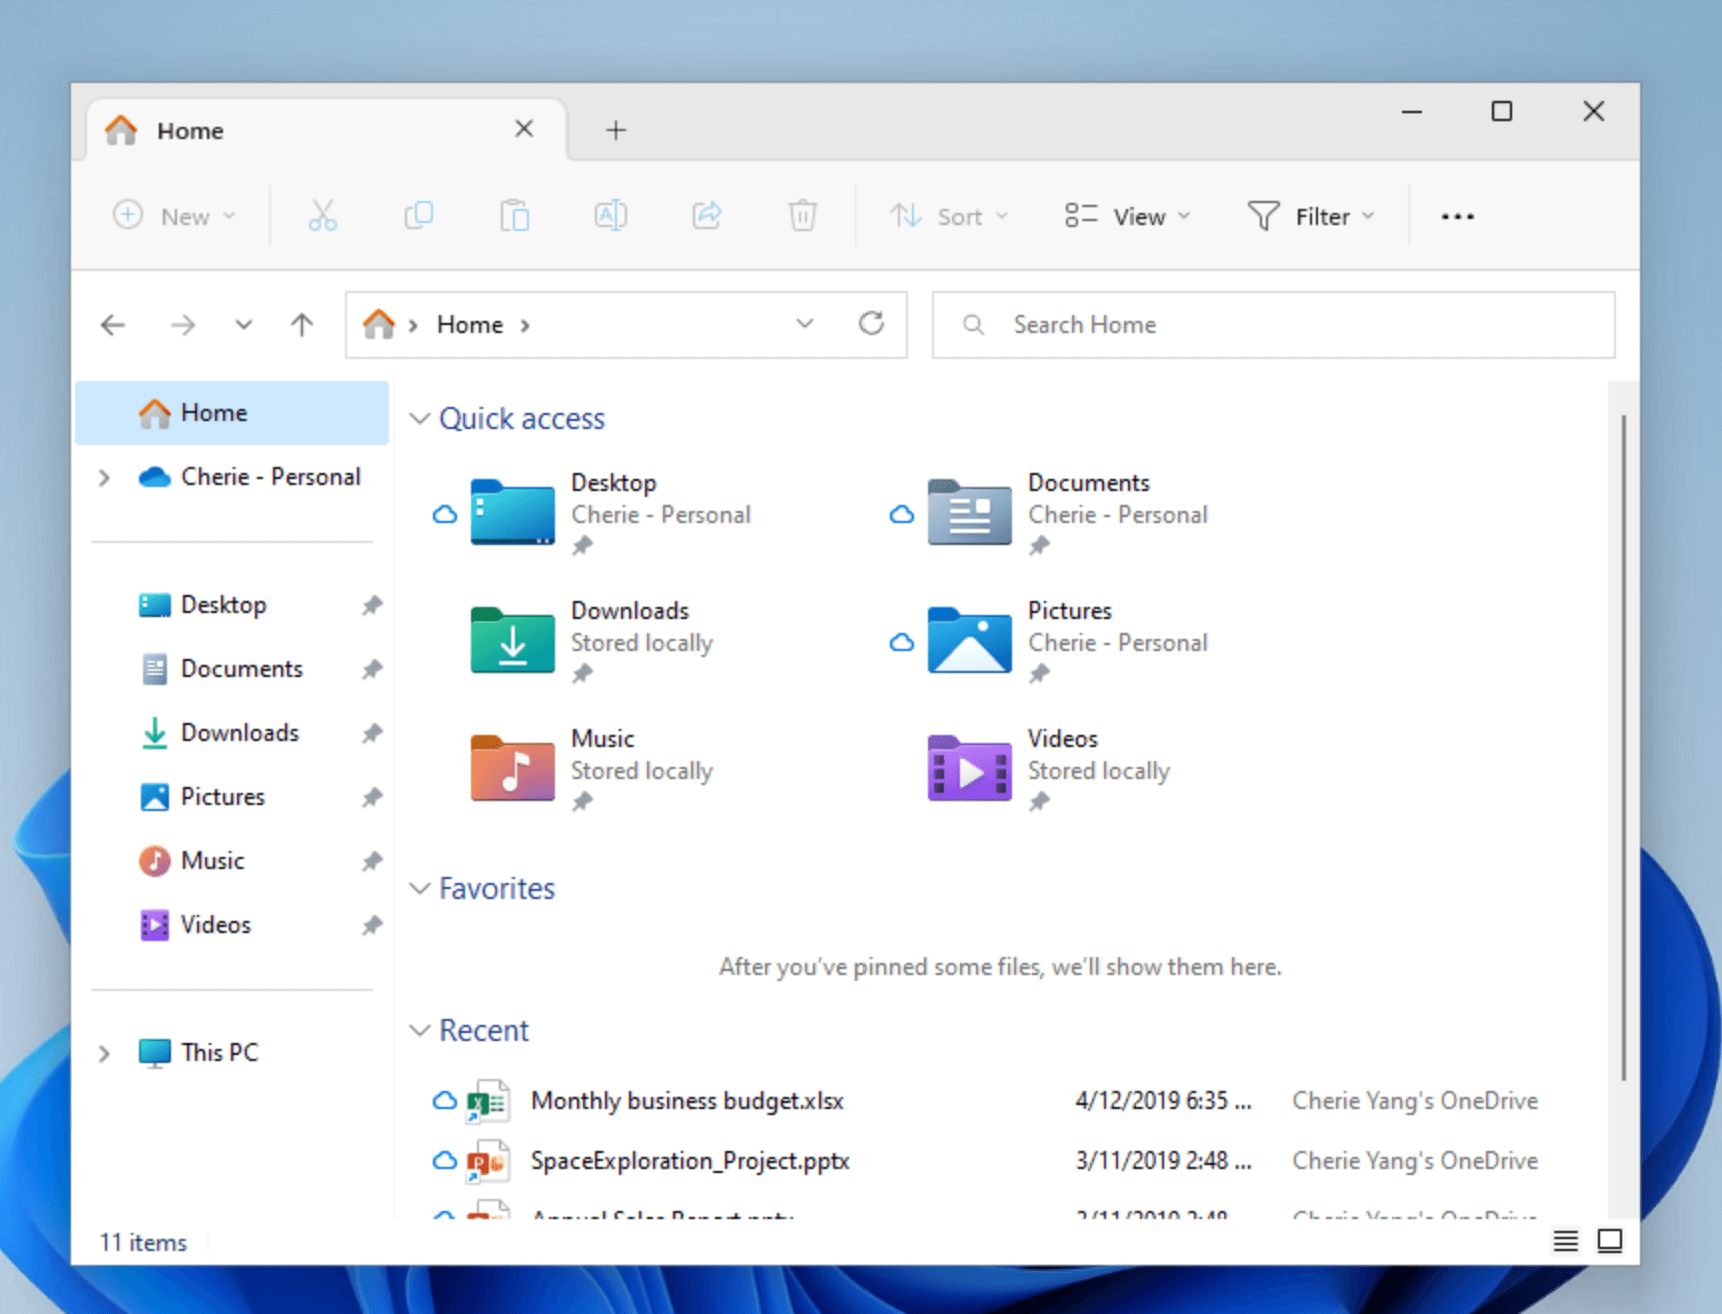 Shows the File Explorer main page, with Home highlighted in the left pane.